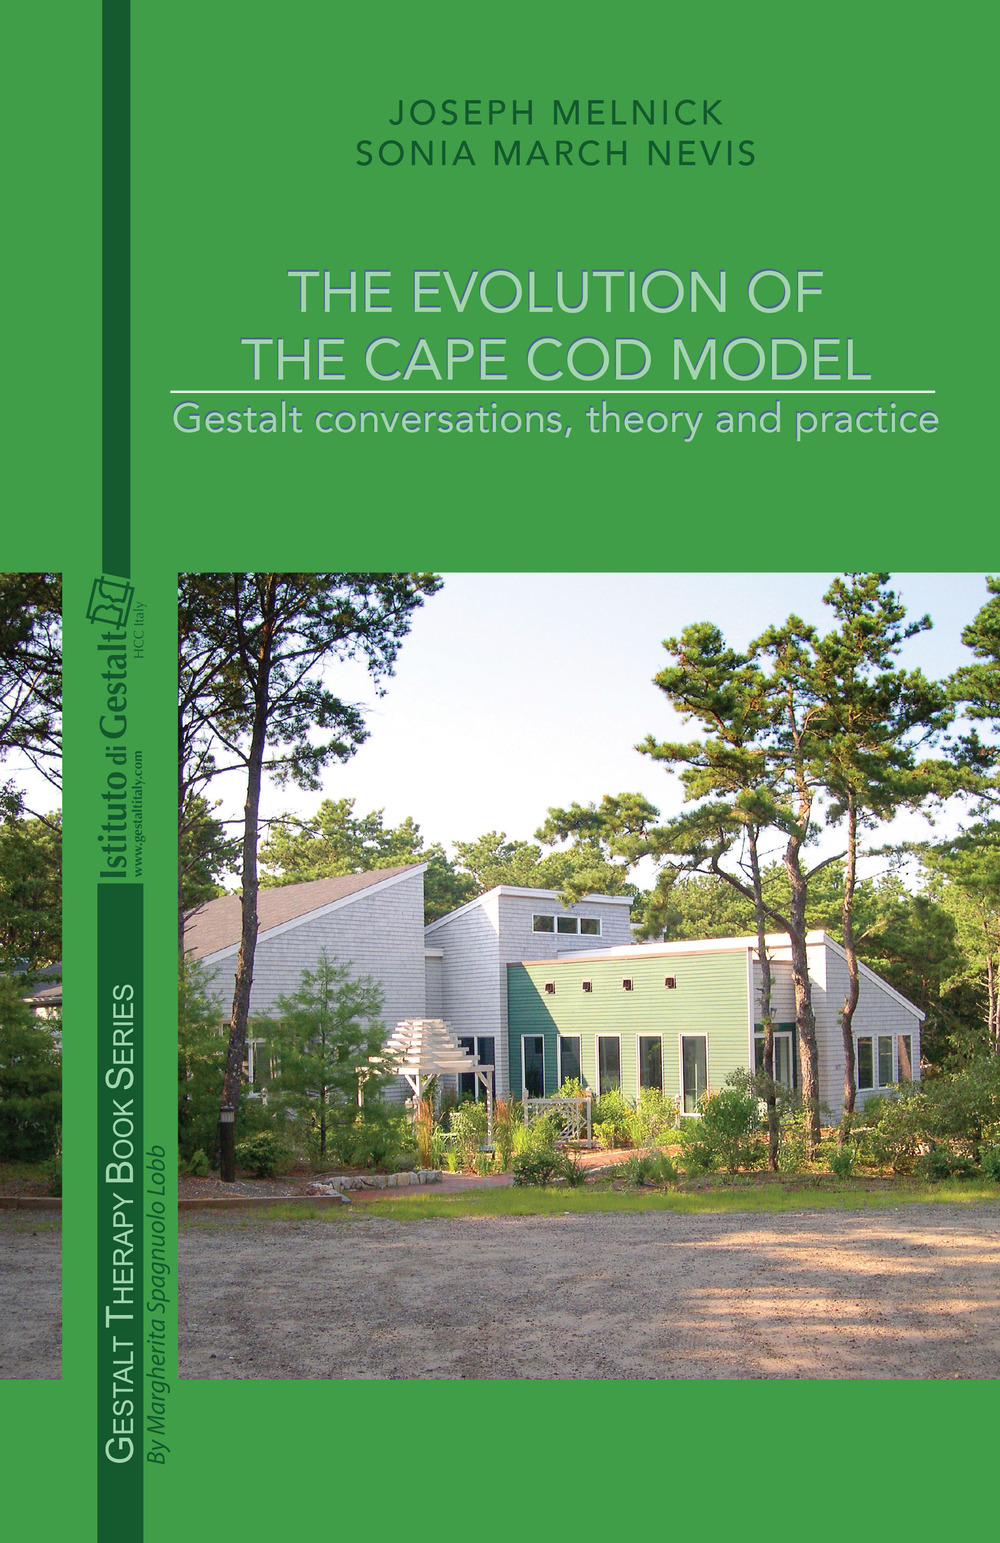 The Evolution of the Cape Cod Model. Gestalt conversations, theory and practice